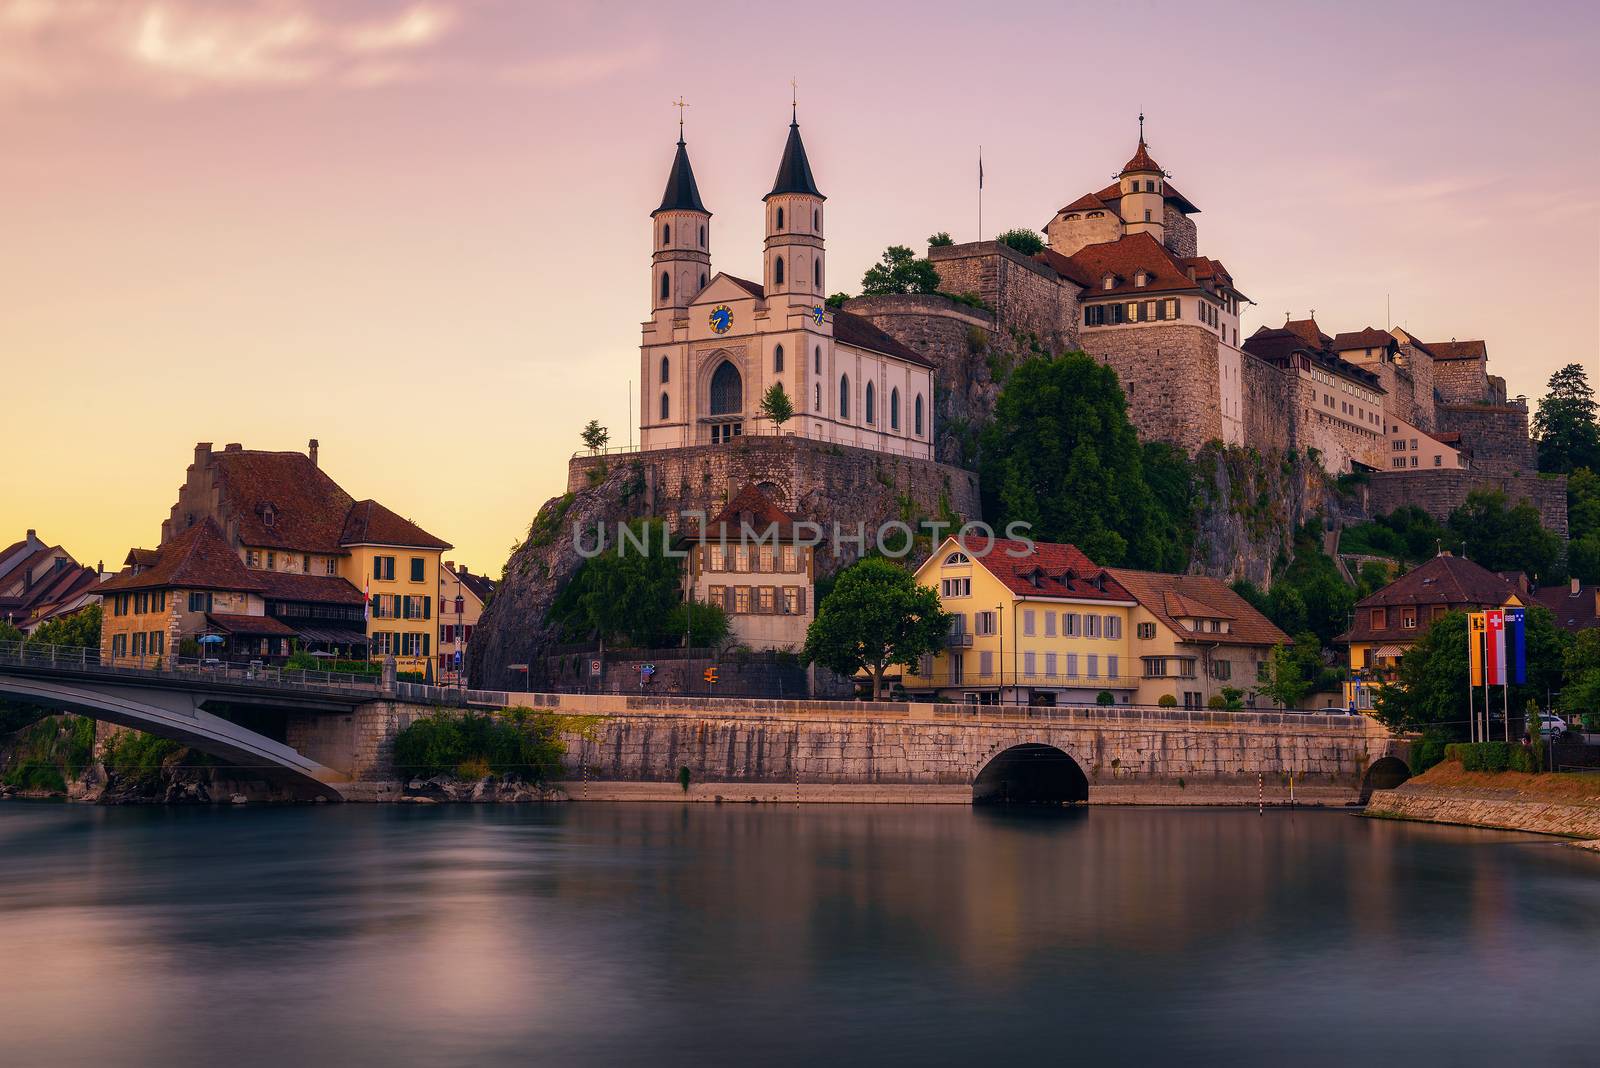 Aarburg Castle and the Aare river in the canton of Aargau, Switzerland by nickfox